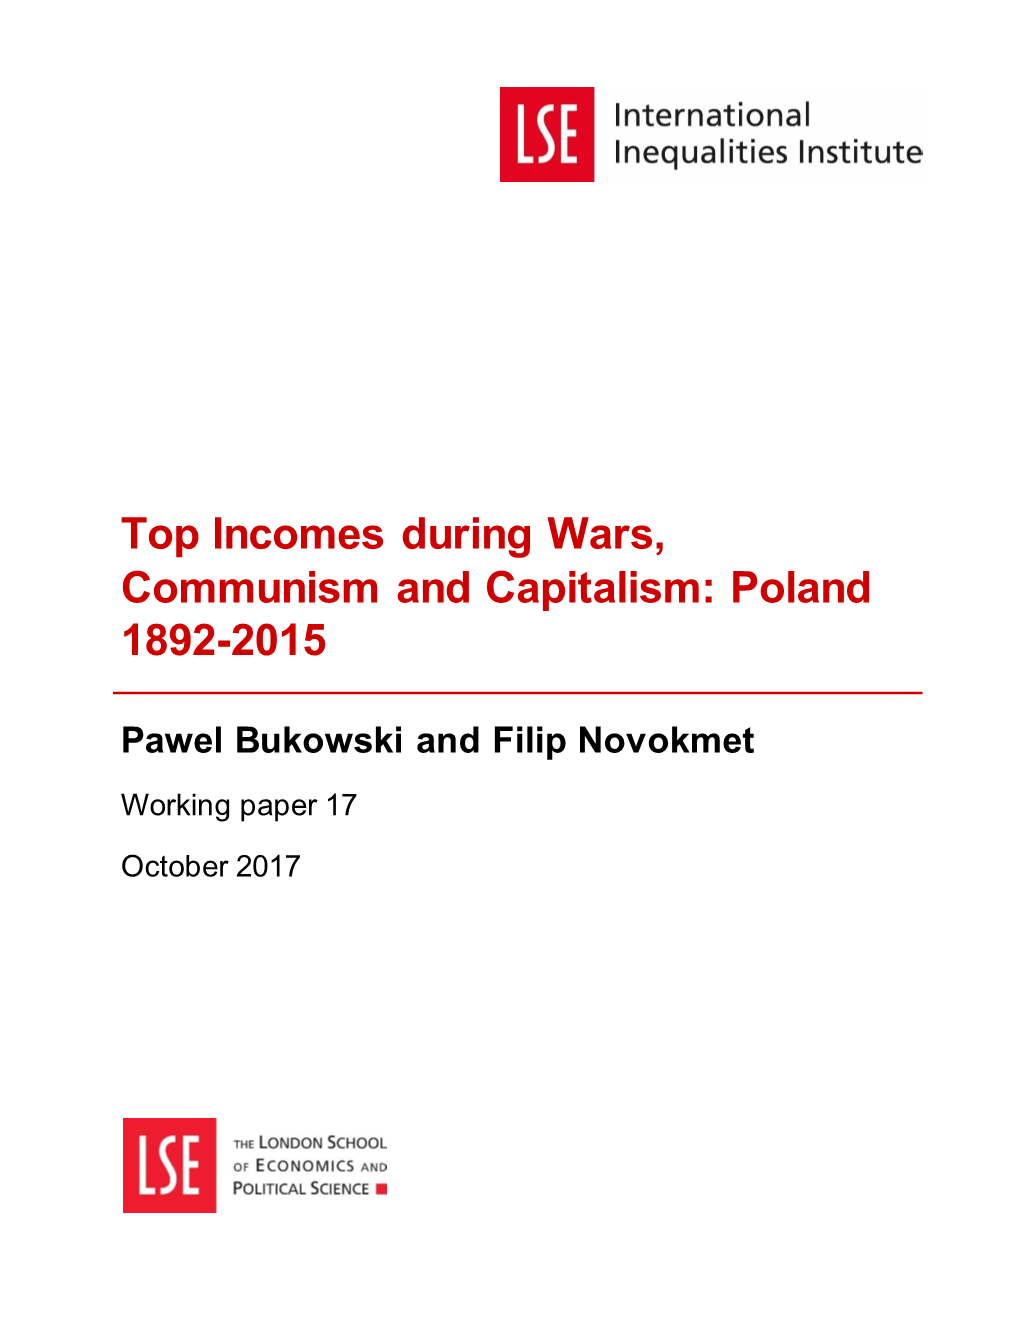 Top Incomes During Wars, Communism and Capitalism: Poland 1892-2015